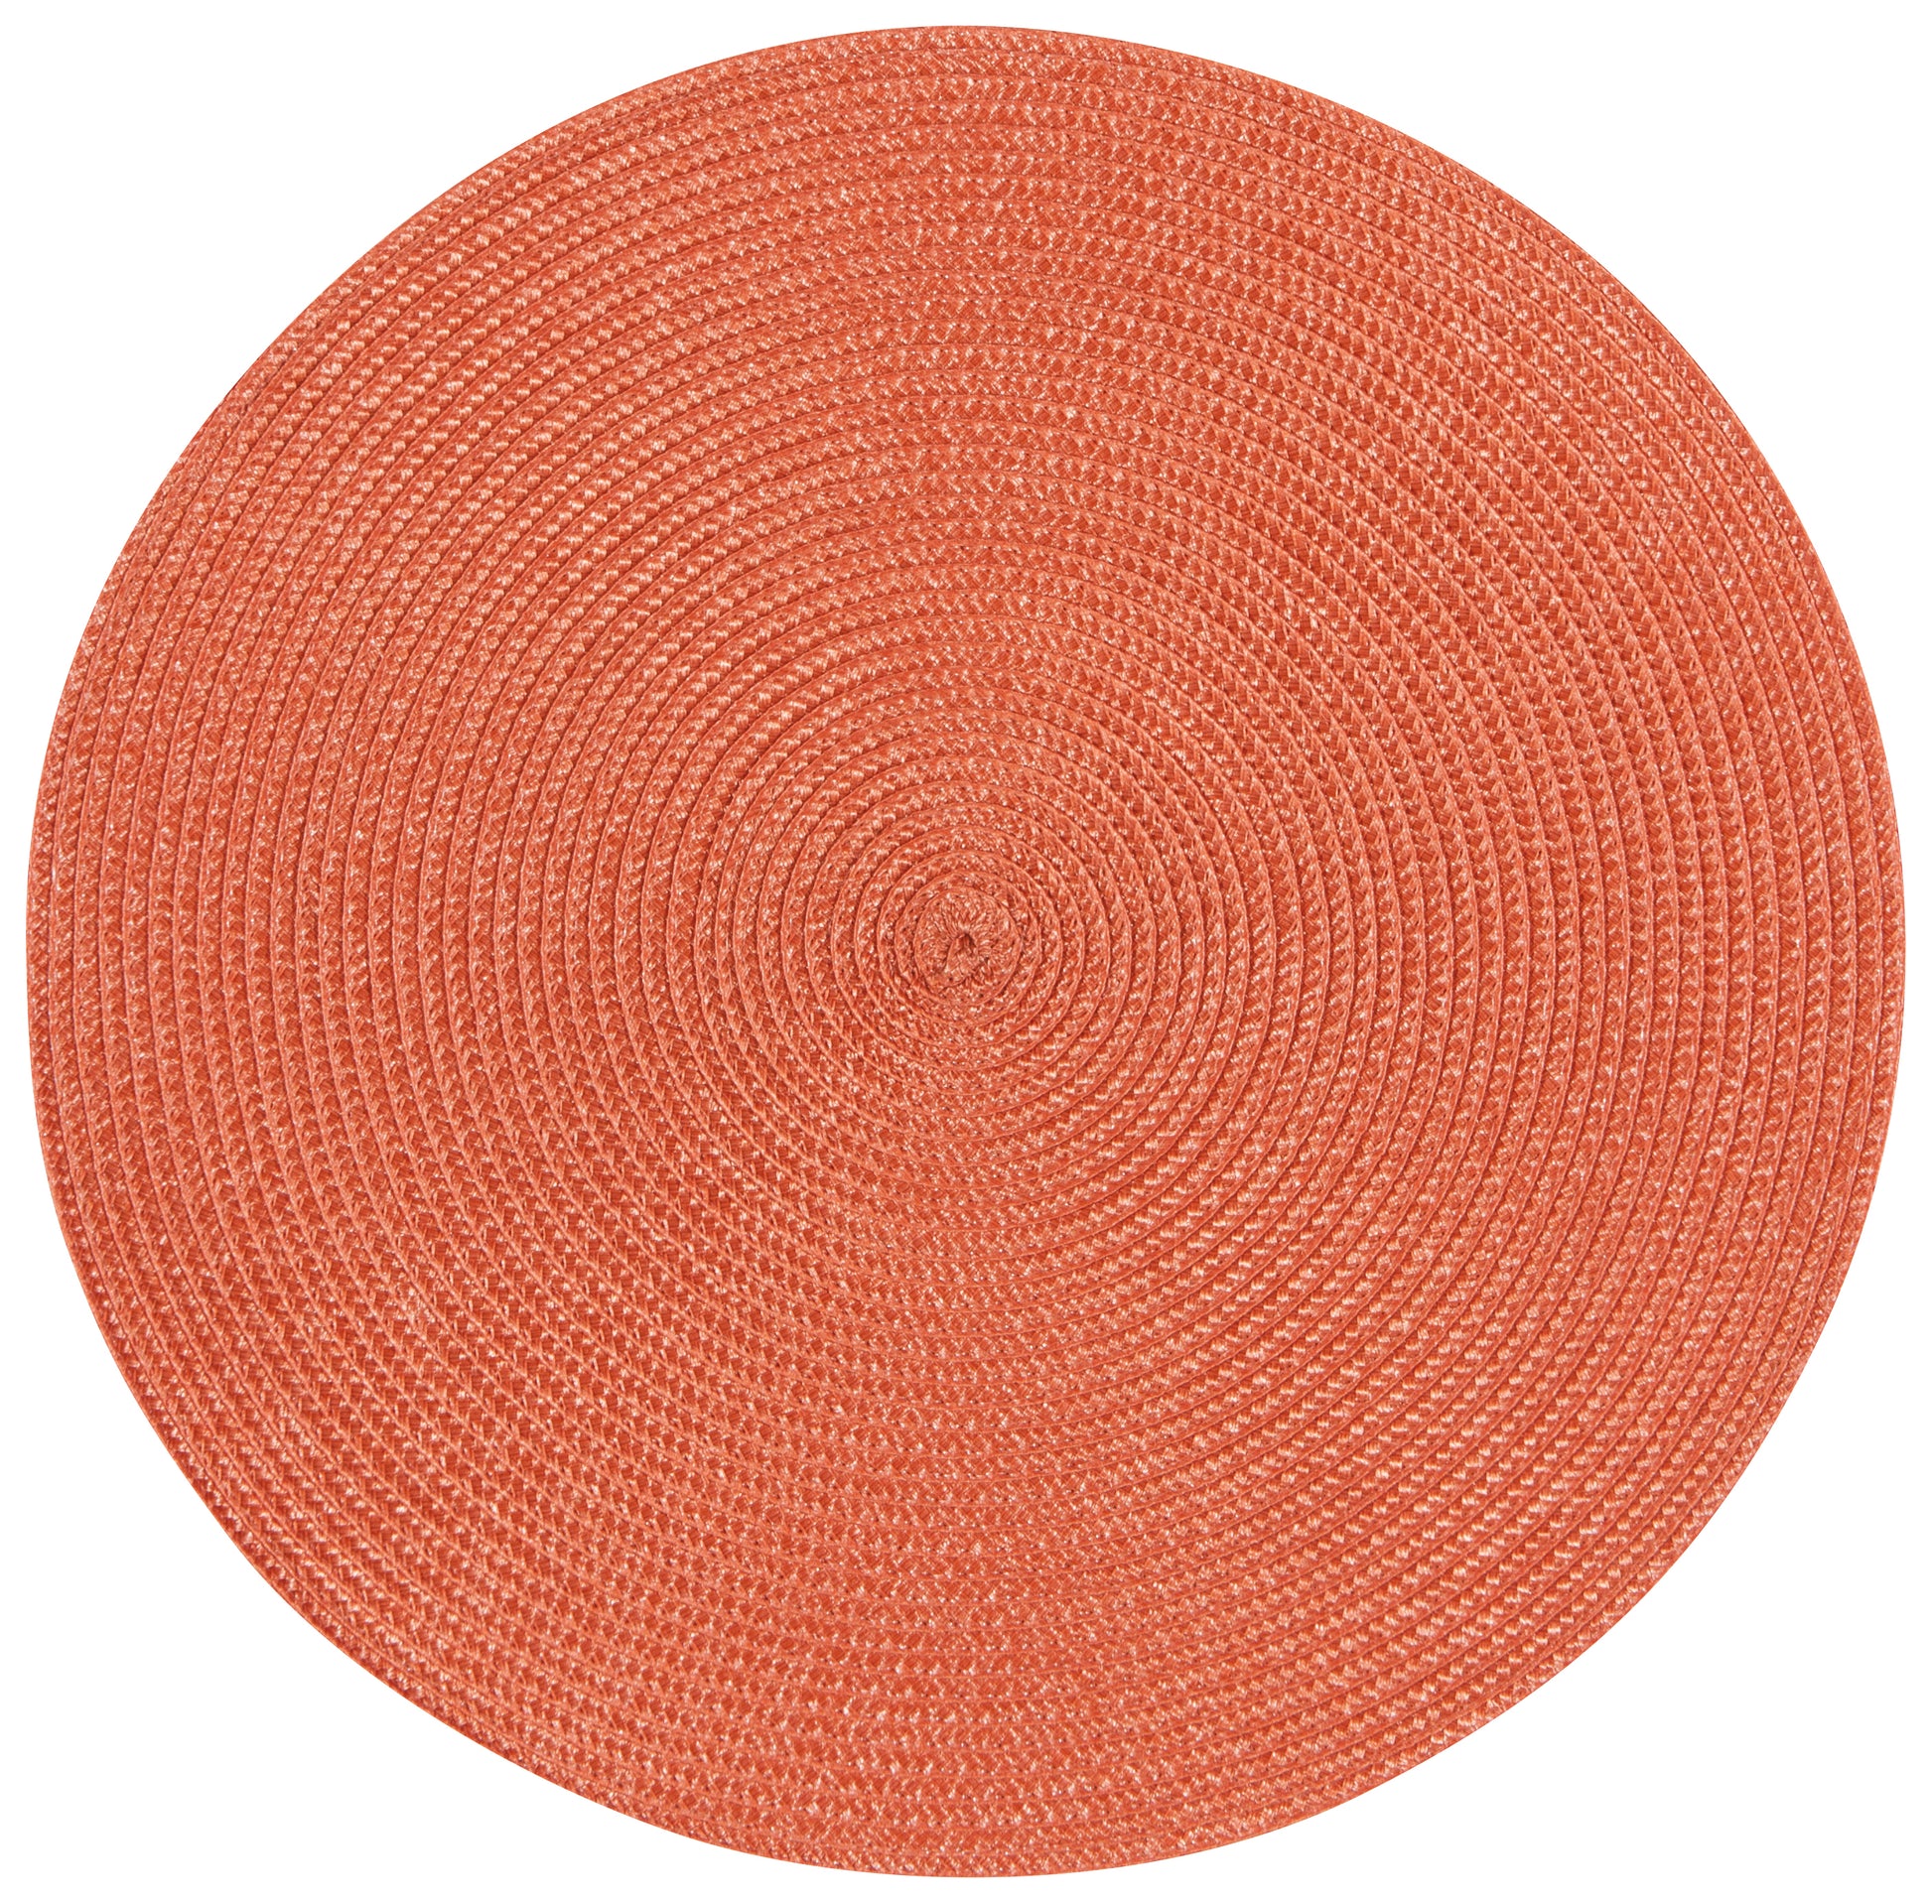 top view of rusty orange place mat on a white background